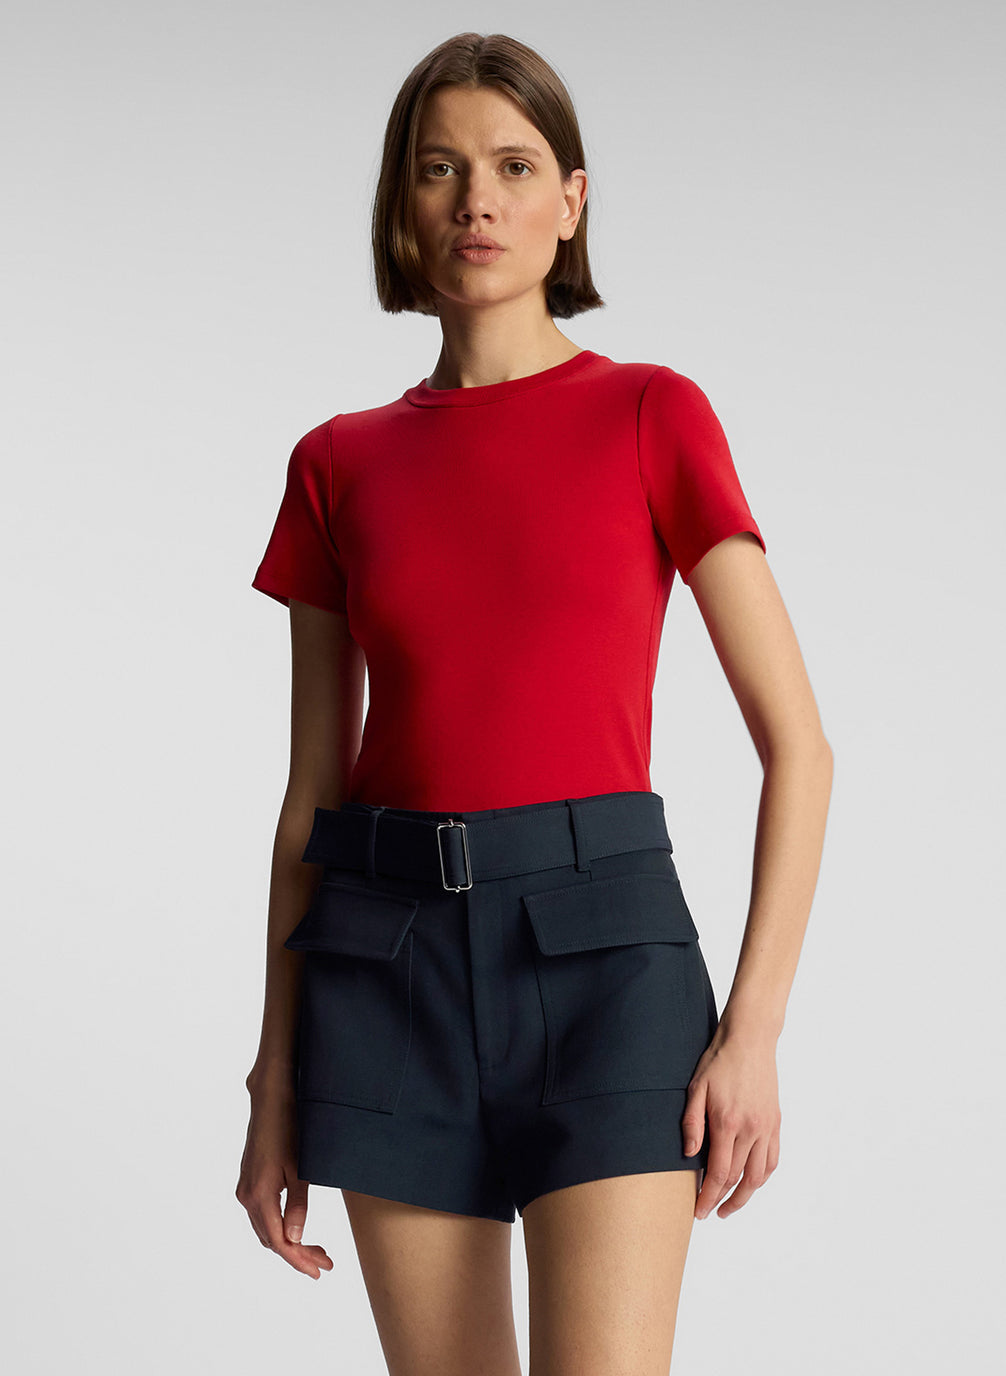 front view of woman wearing red t shirt and navy blue shorts